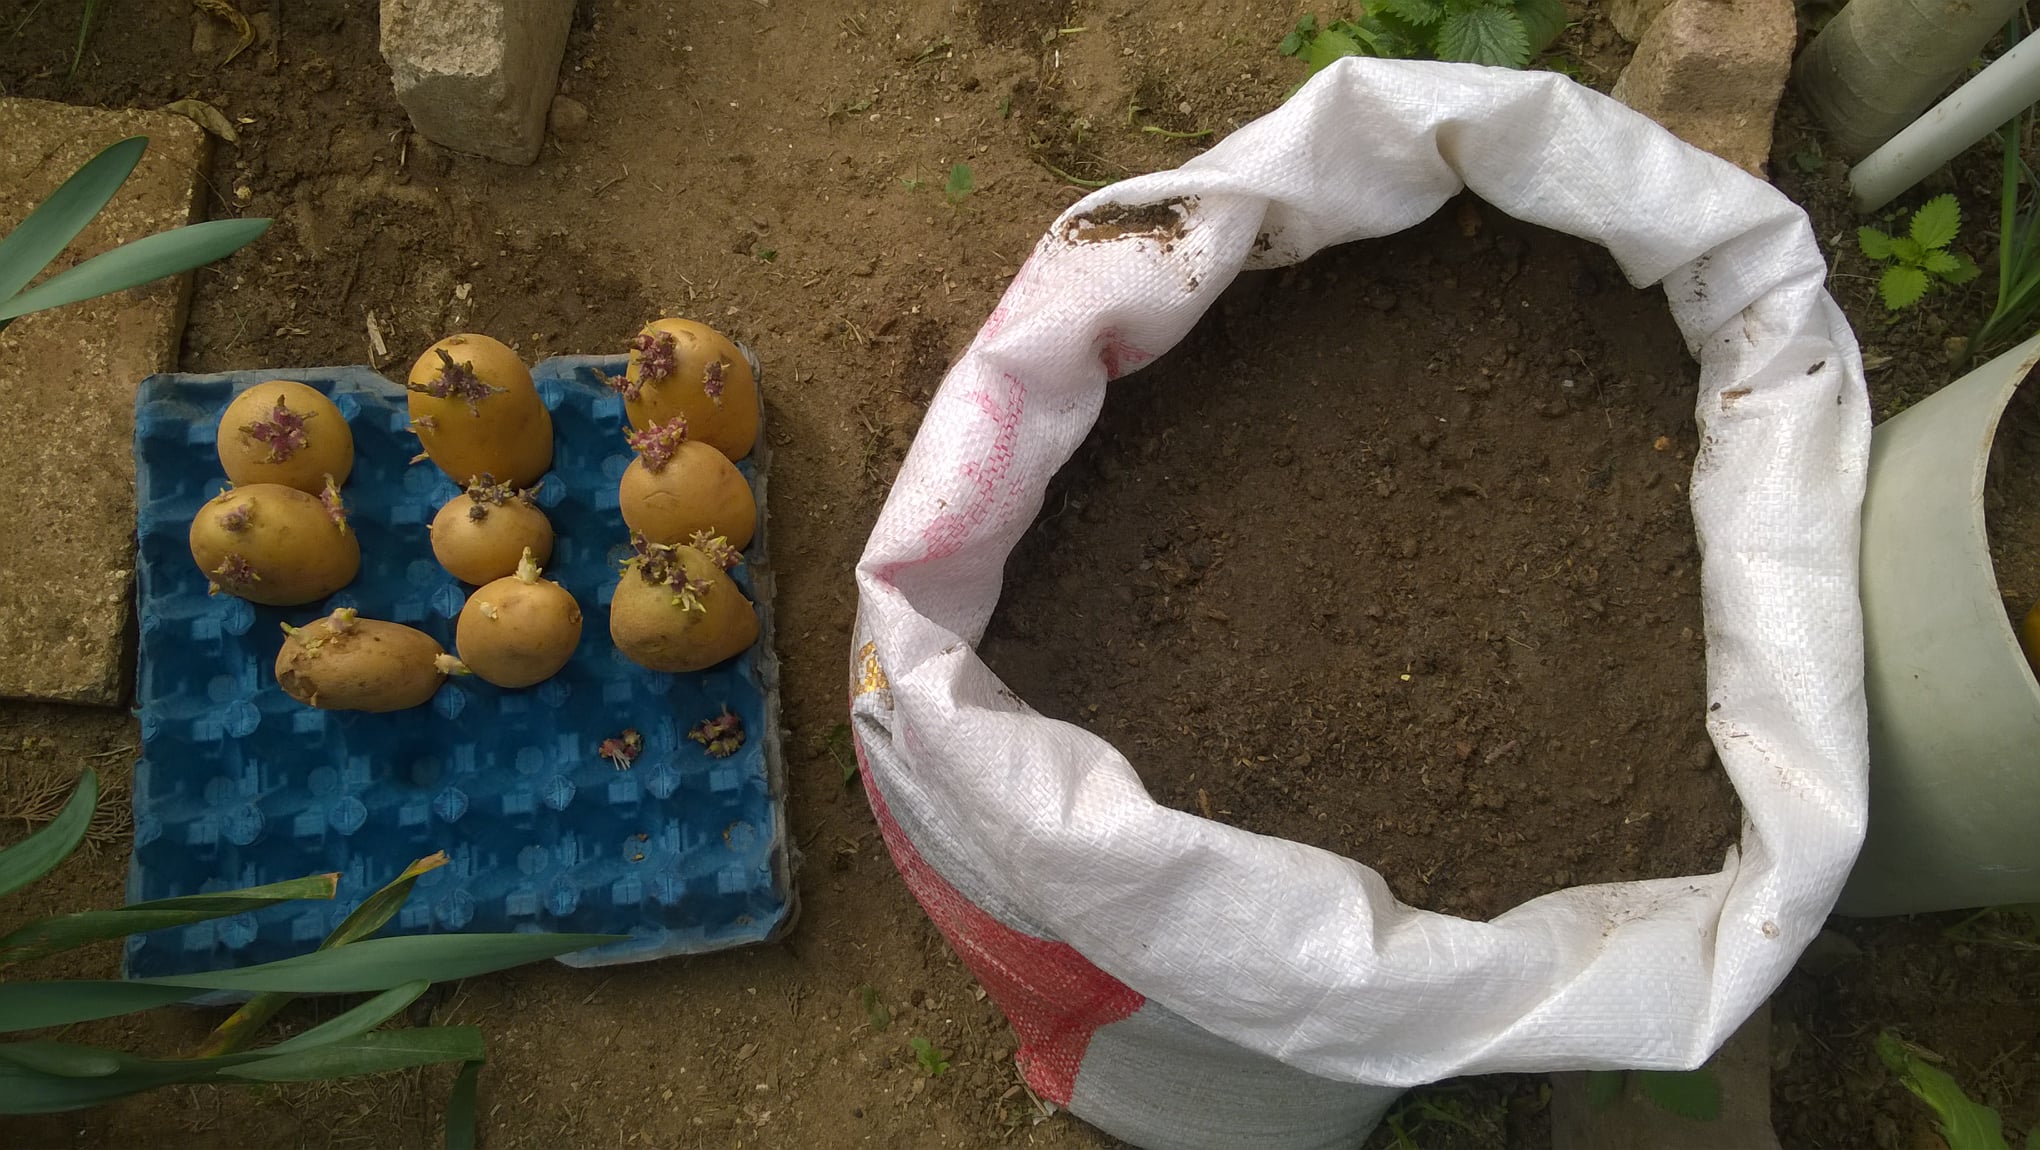 Growing Potatoes in Bags or Containers (potatoes forum at permies)